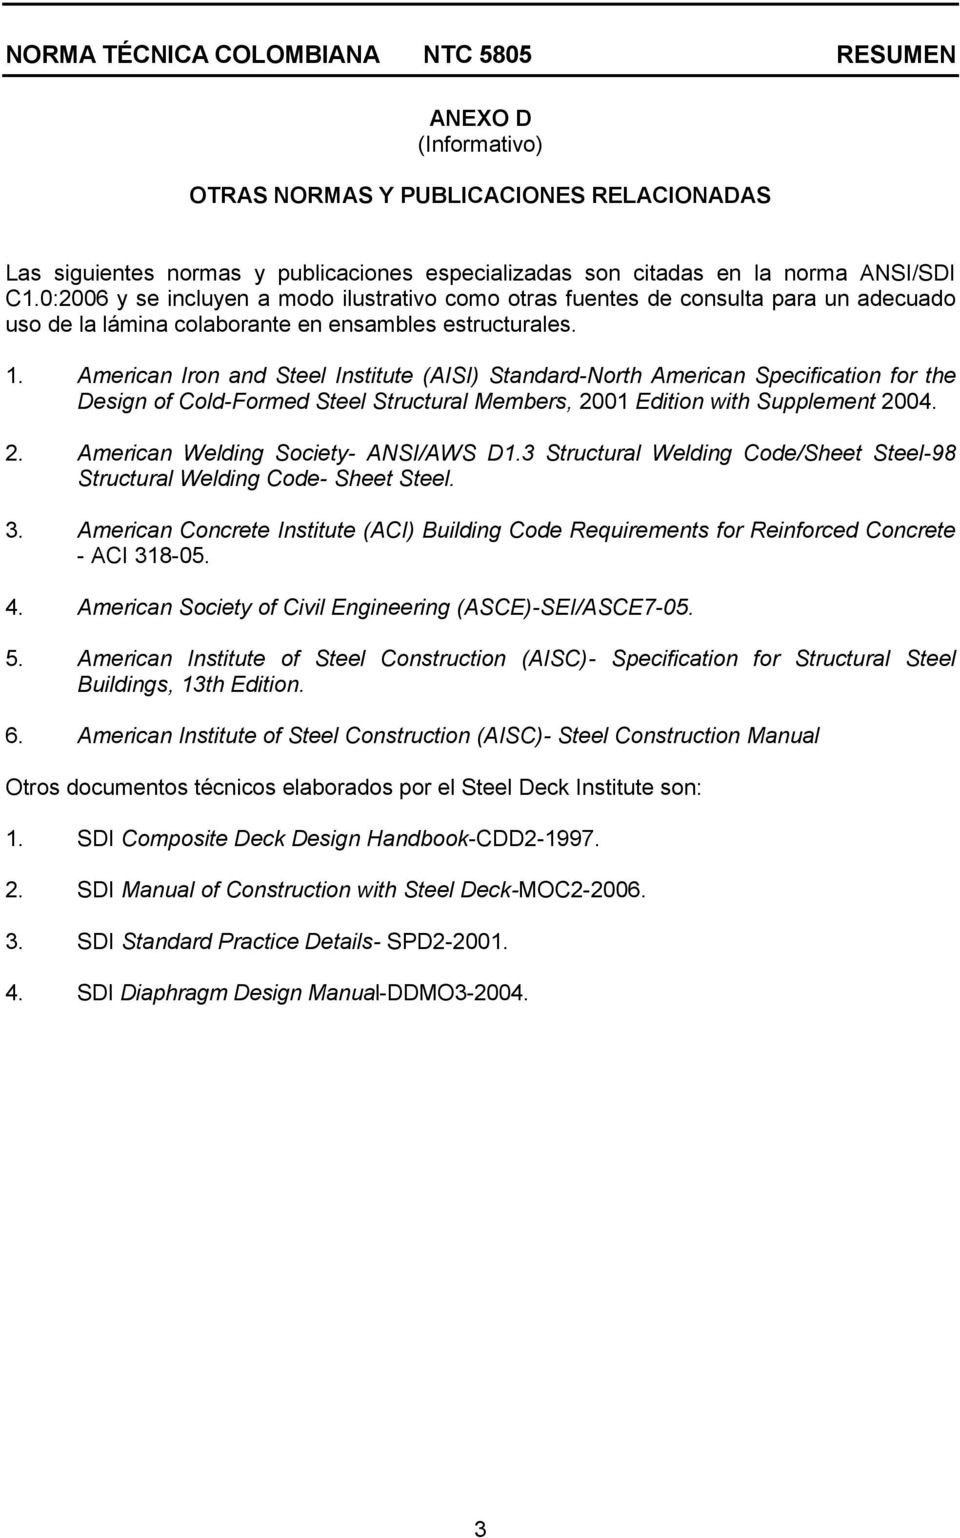 American Iron and Steel Institute (AISI) Standard-North American Specification for the Design of Cold-Formed Steel Structural Members, 2001 Edition with Supplement 2004. 2. American Welding Society- ANSI/AWS D1.